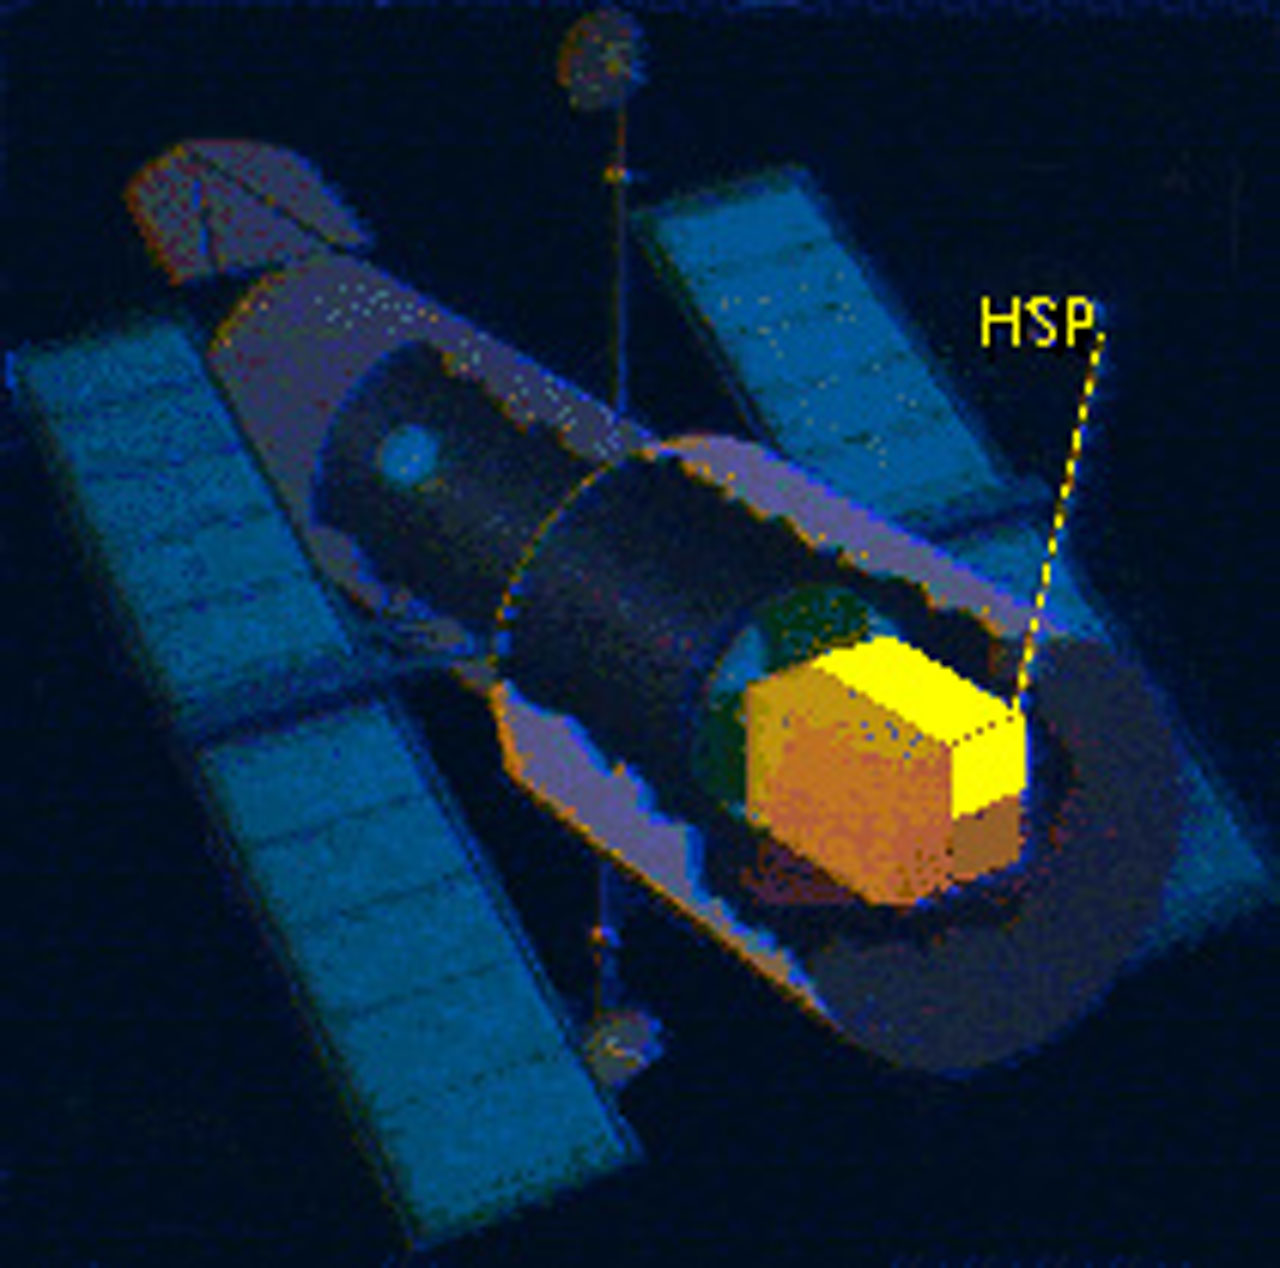  The position of HSP in Hubble's instrument bay.